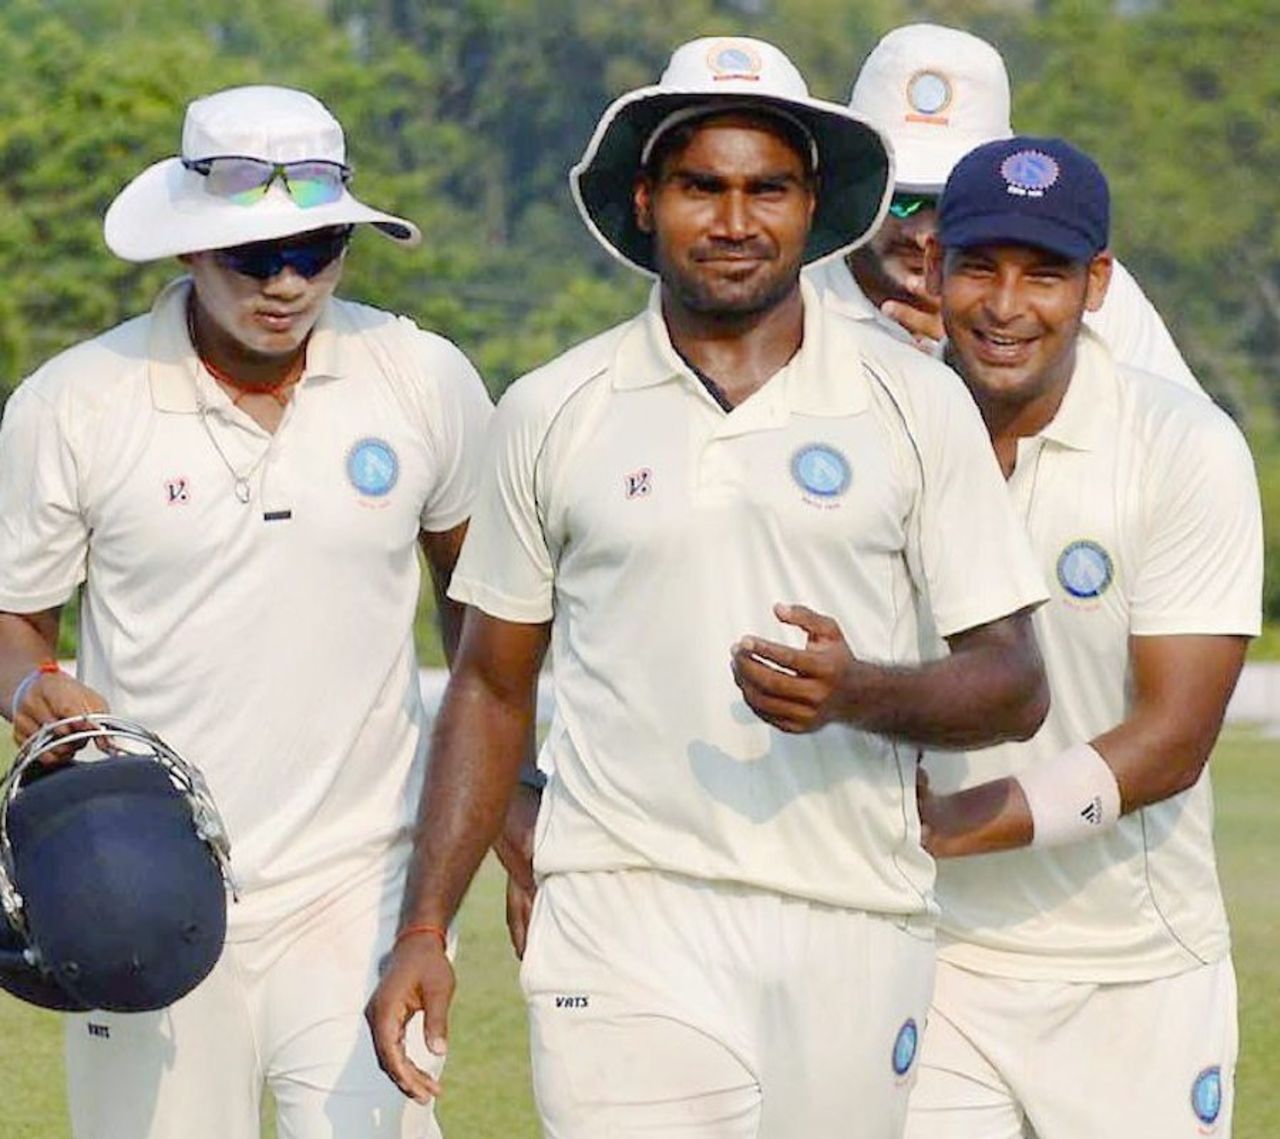 Rahul Shukla is congratulated by team-mates after finishing with a six-for, Tripura v Jharkhand, Group C, Ranji Trophy 2015-16, Agartala, 1st day, November 15, 2015